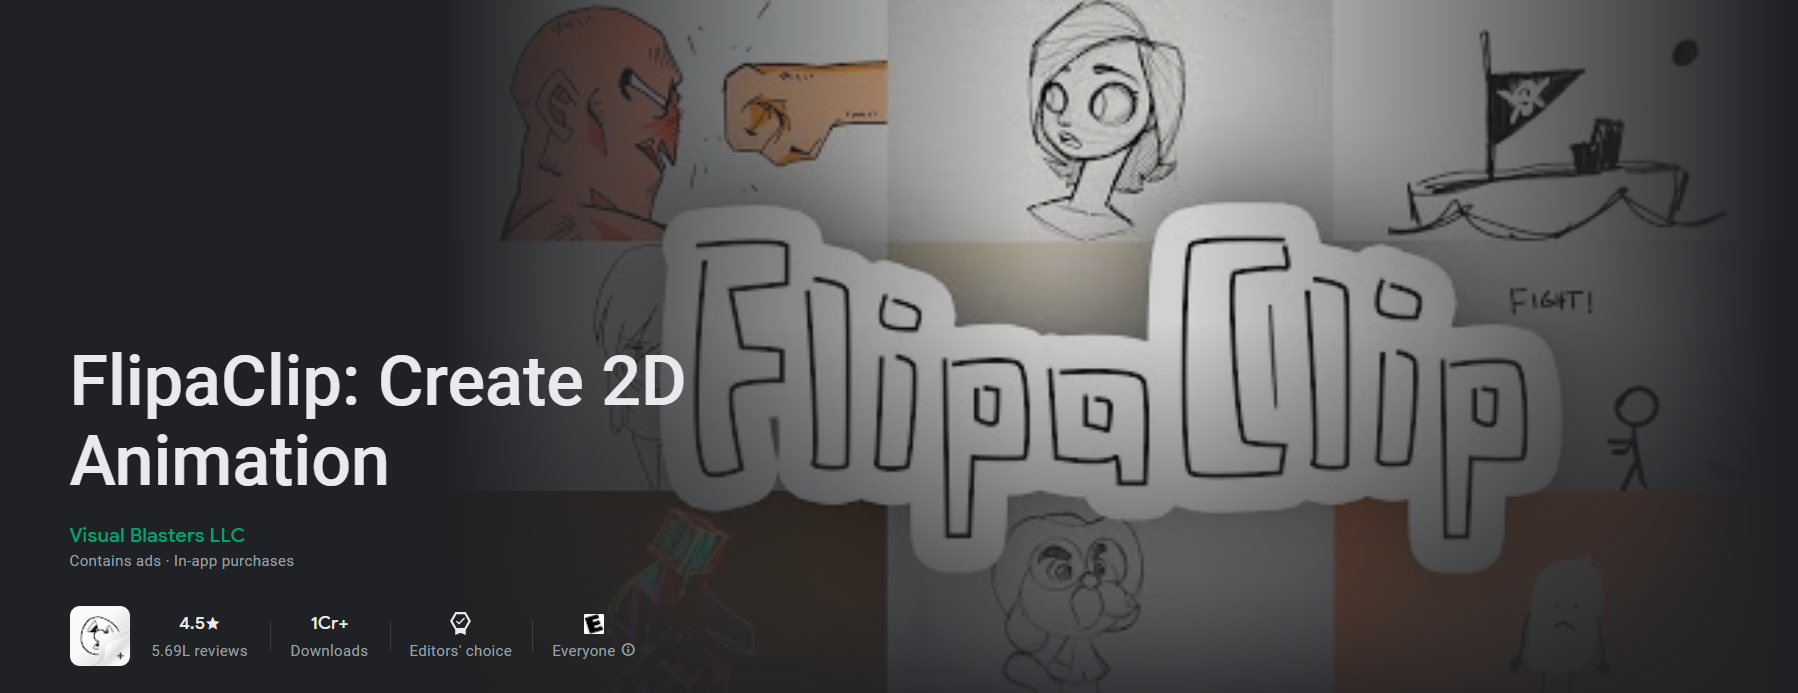 FlipaClip : Best Animation Apps For iPad